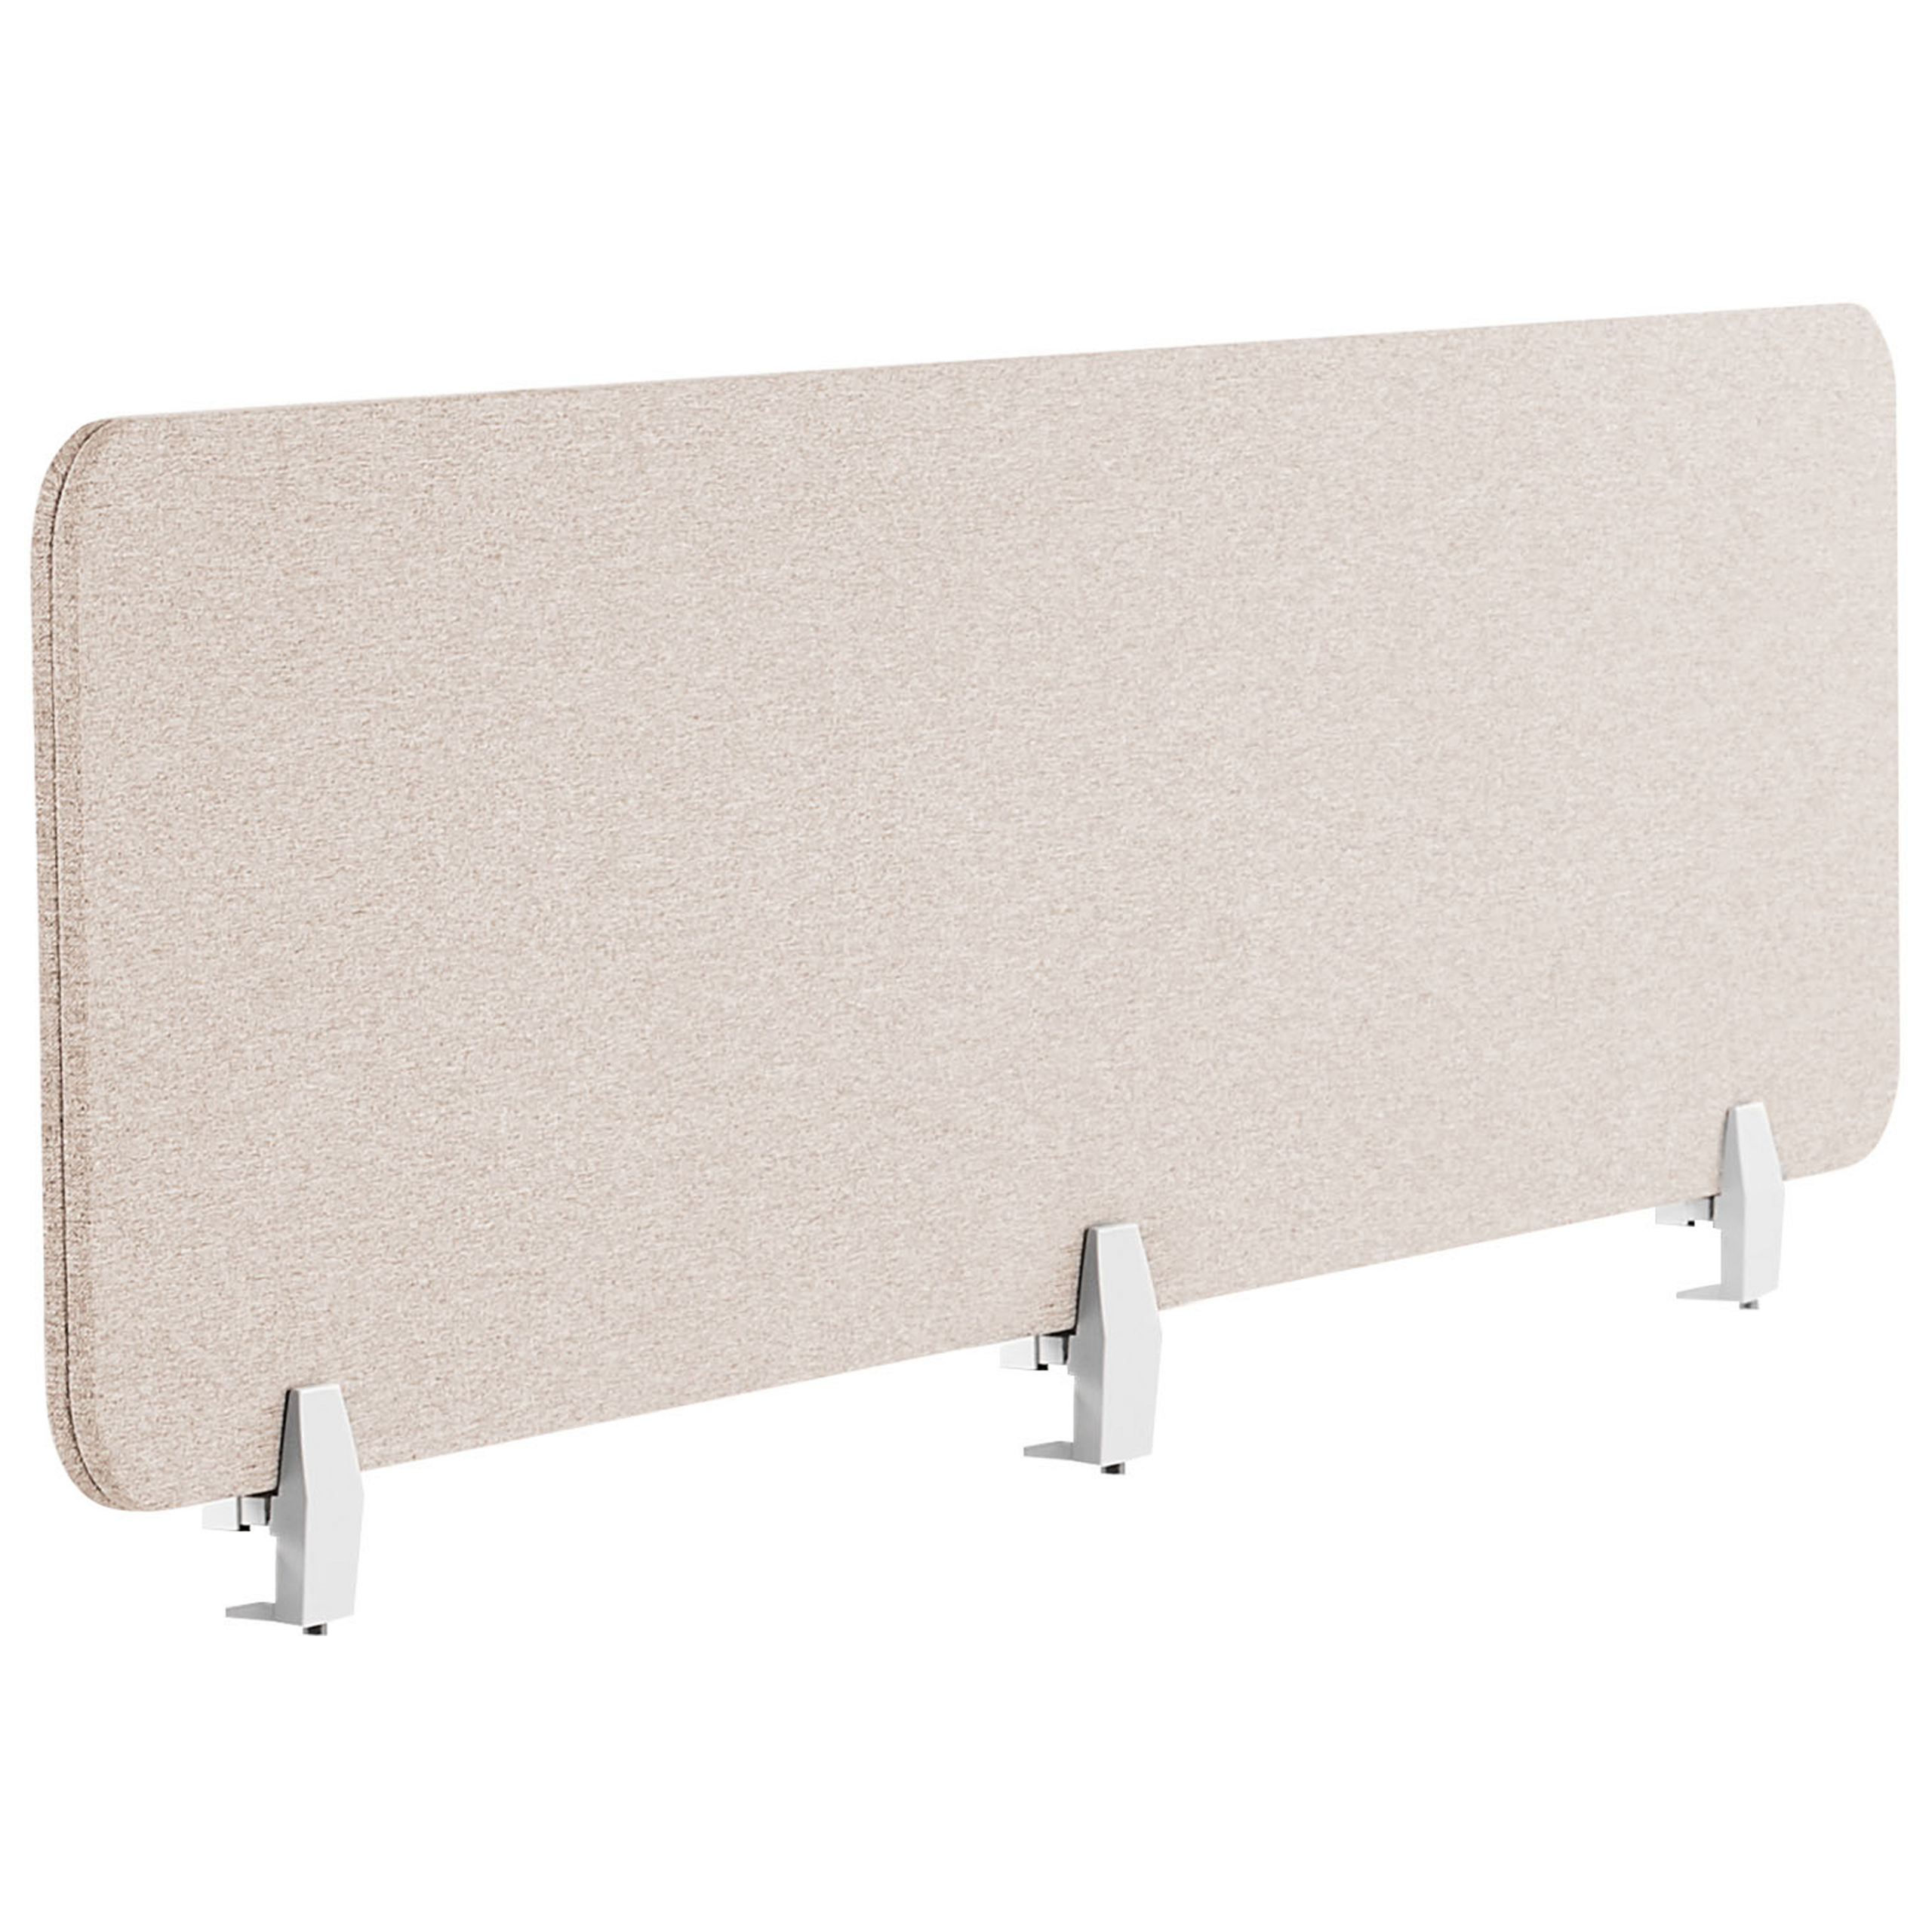 Beliani Desk Screen Beige PET Board Fabric Cover 180 x 40 cm Acoustic Screen Modular Mounting Clamps Home Office Material:Polyester Size:2x40x180